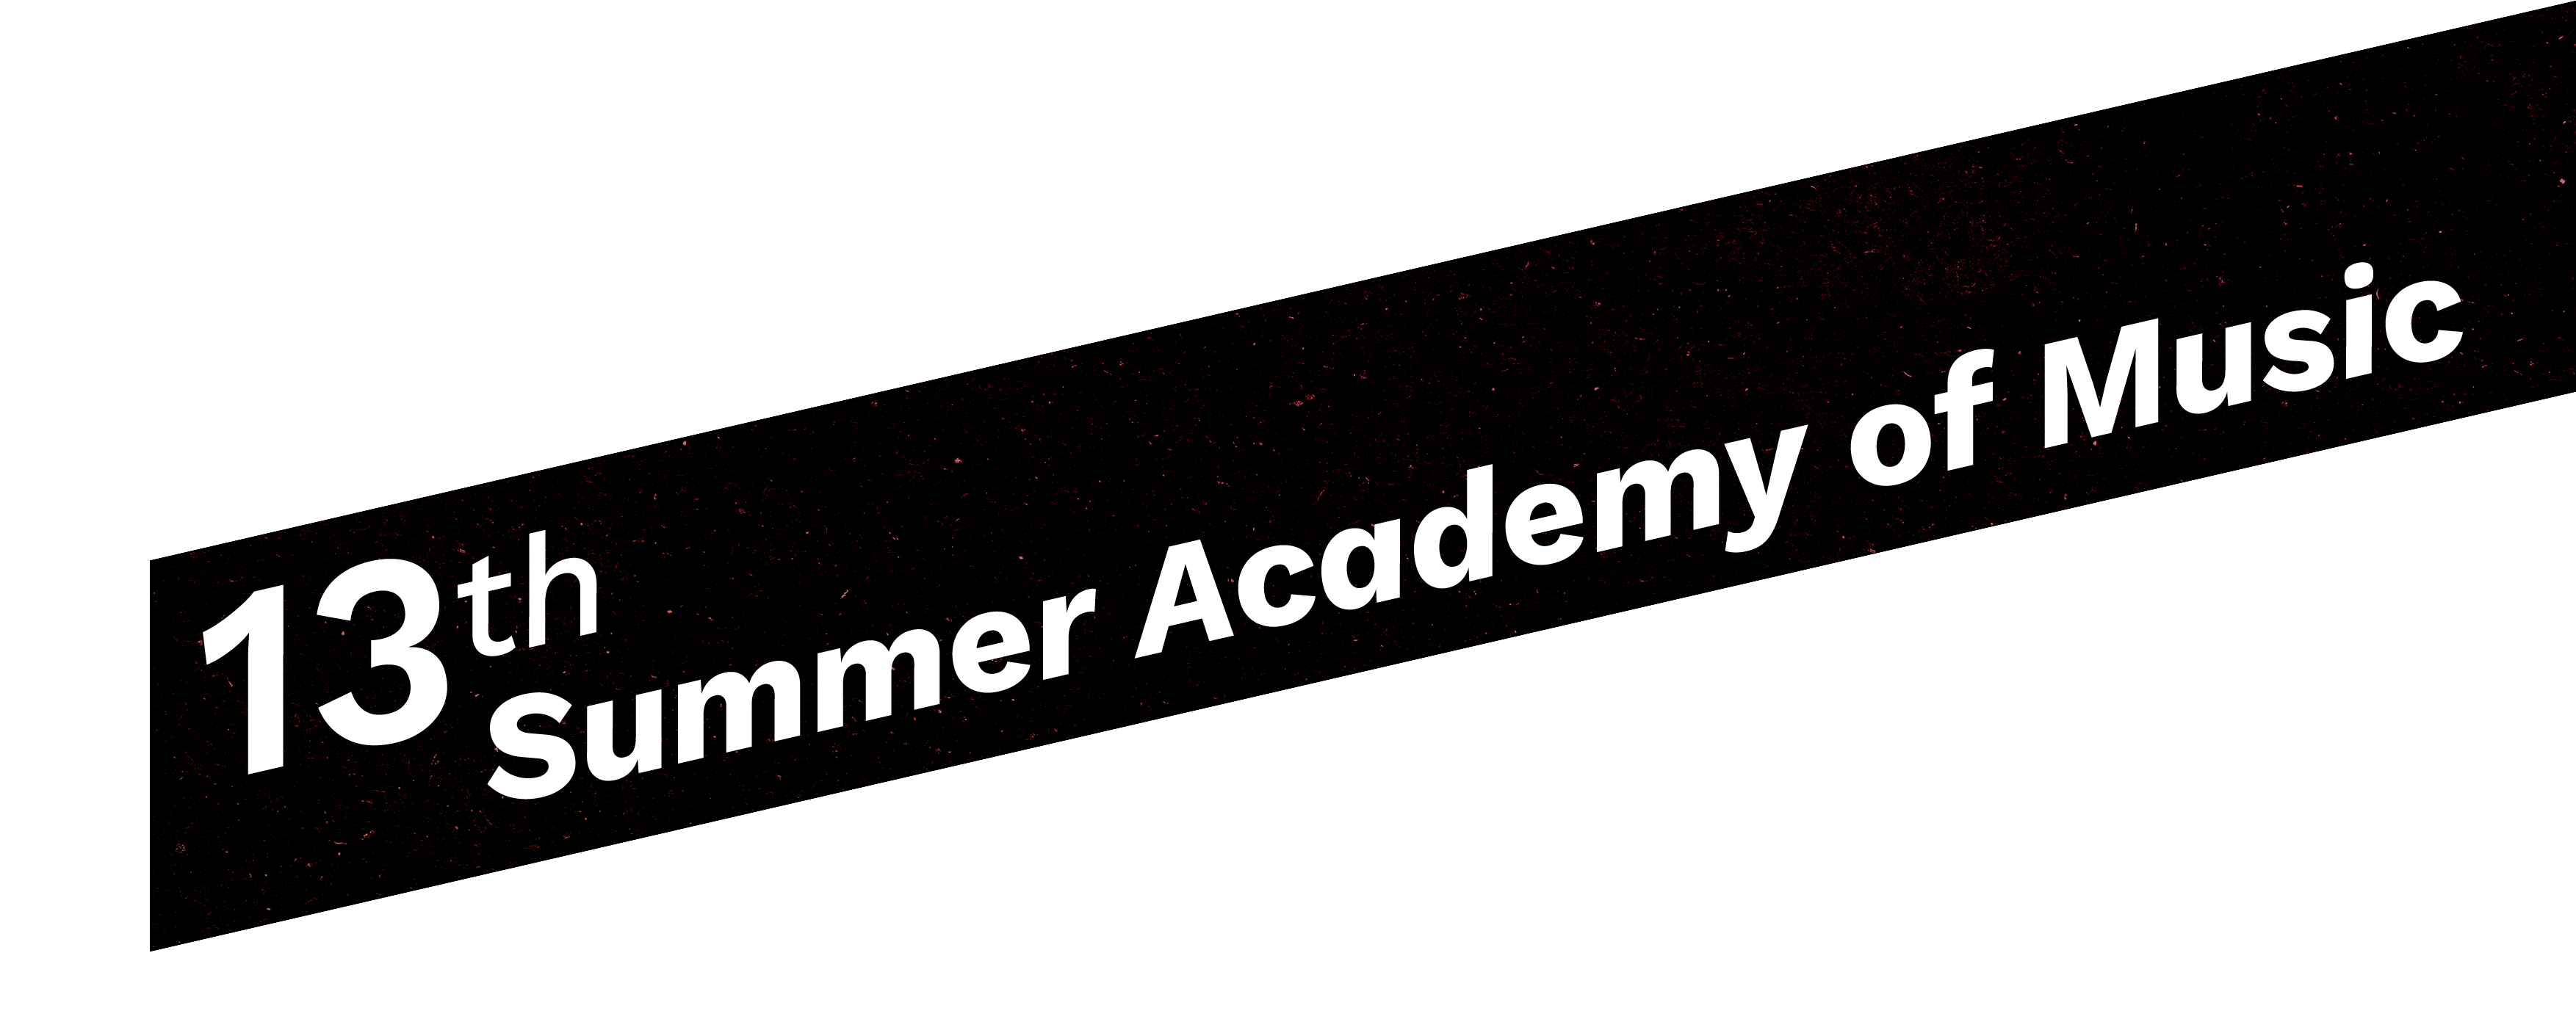 13th Summer Academy of Music